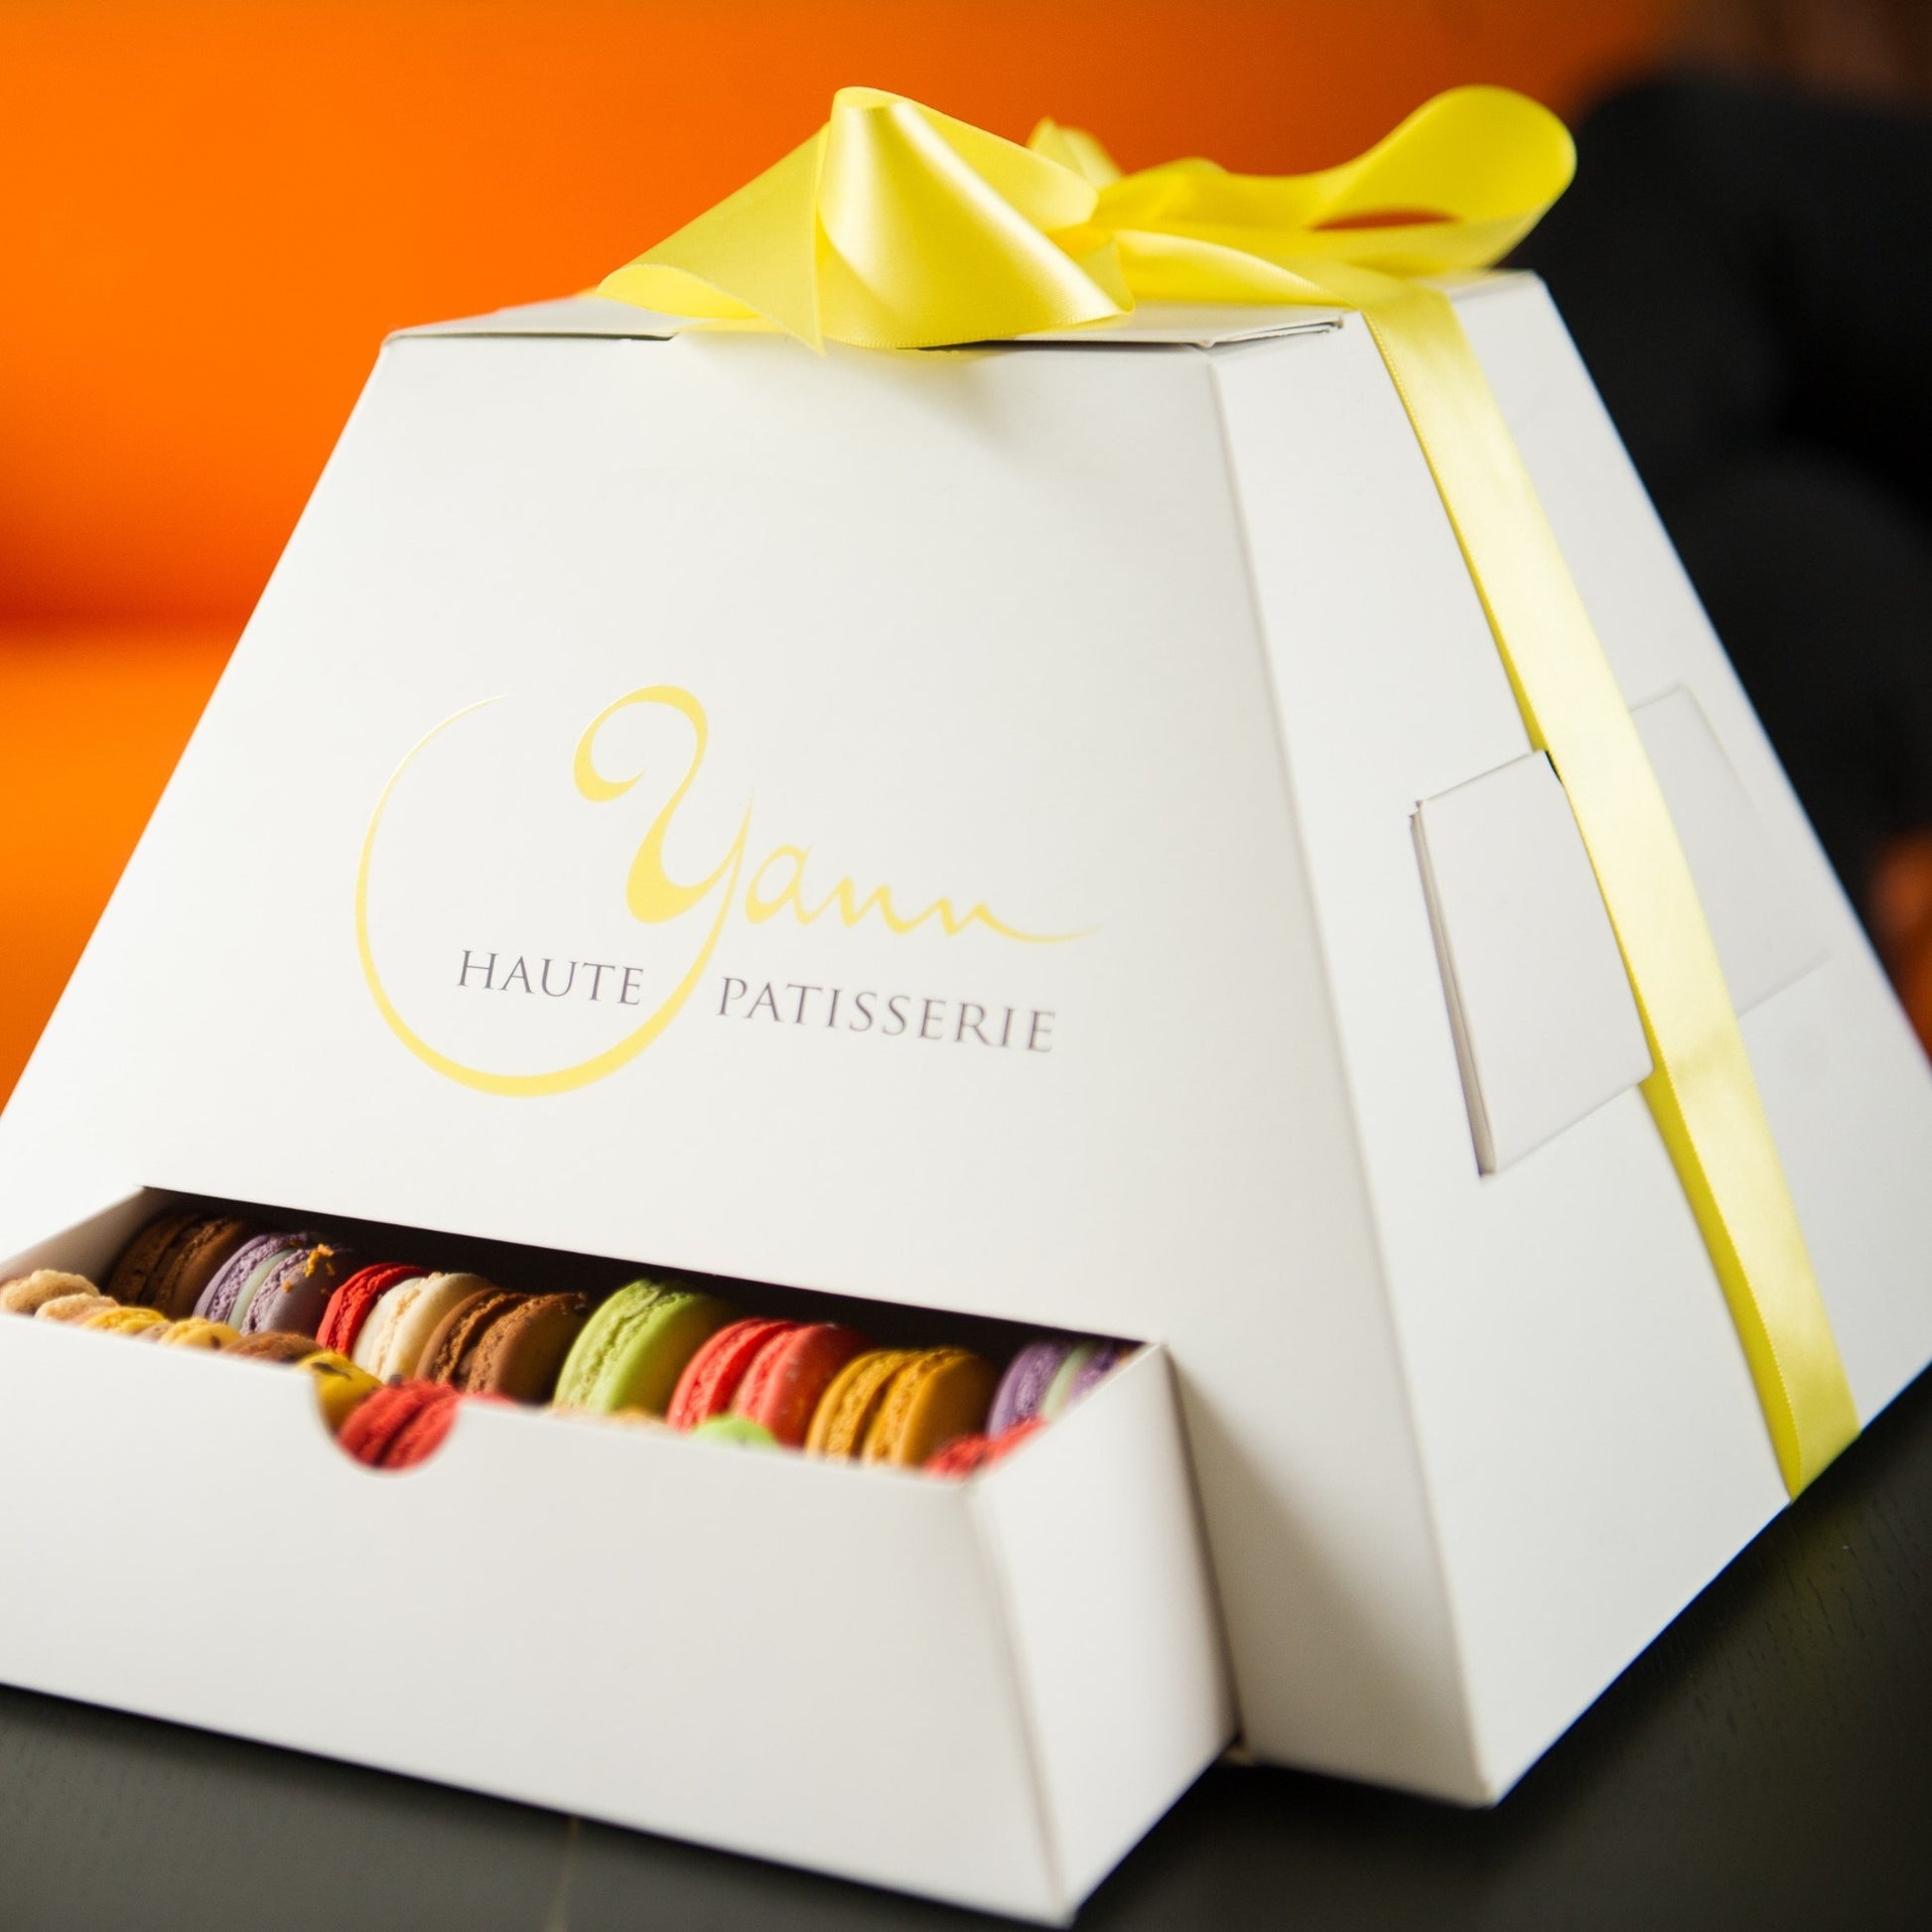 Macarons galore in our amazing pyramid box! Macarons since 2010 - Yann Haute Patisserie, authentic French bakery for the best desserts, cakes, croissants and macarons in this happy yellow house pastry shop. 